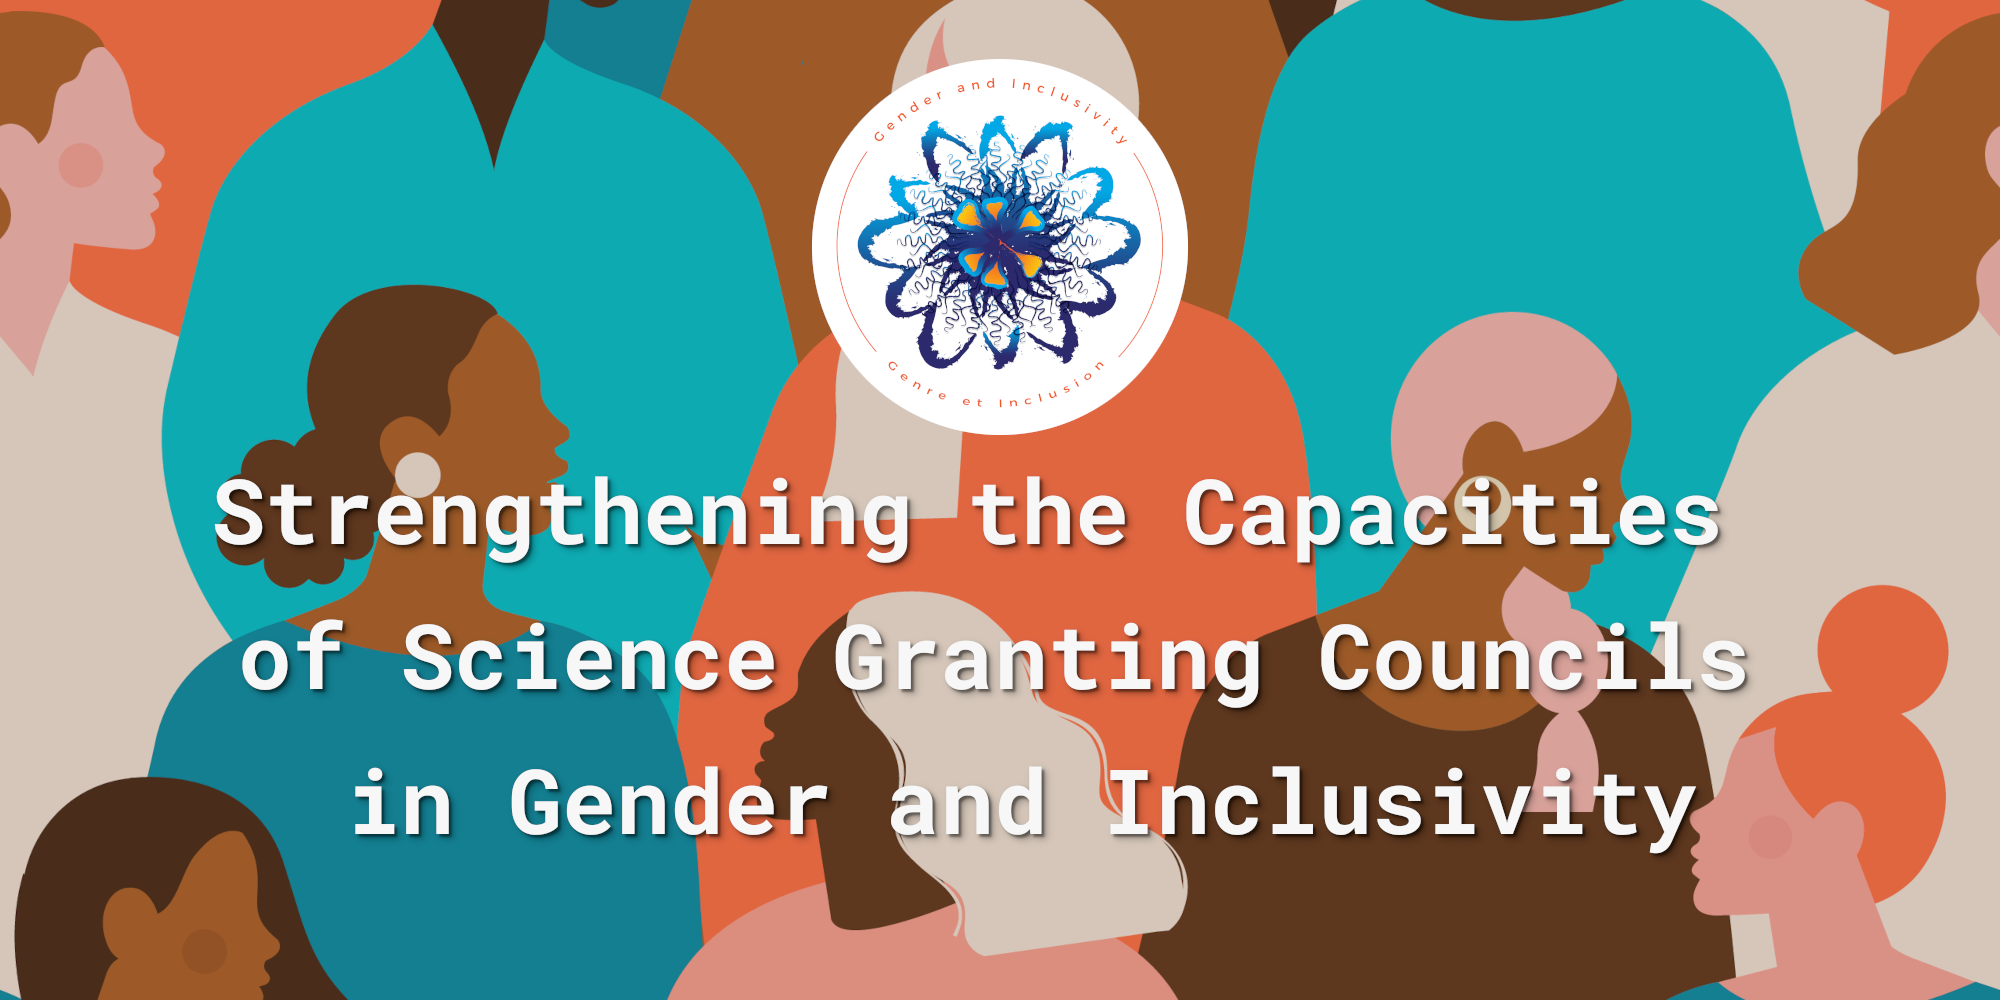 Strengthening the Capacities of Science Granting Councils in Gender and Inclusivity HSRC01